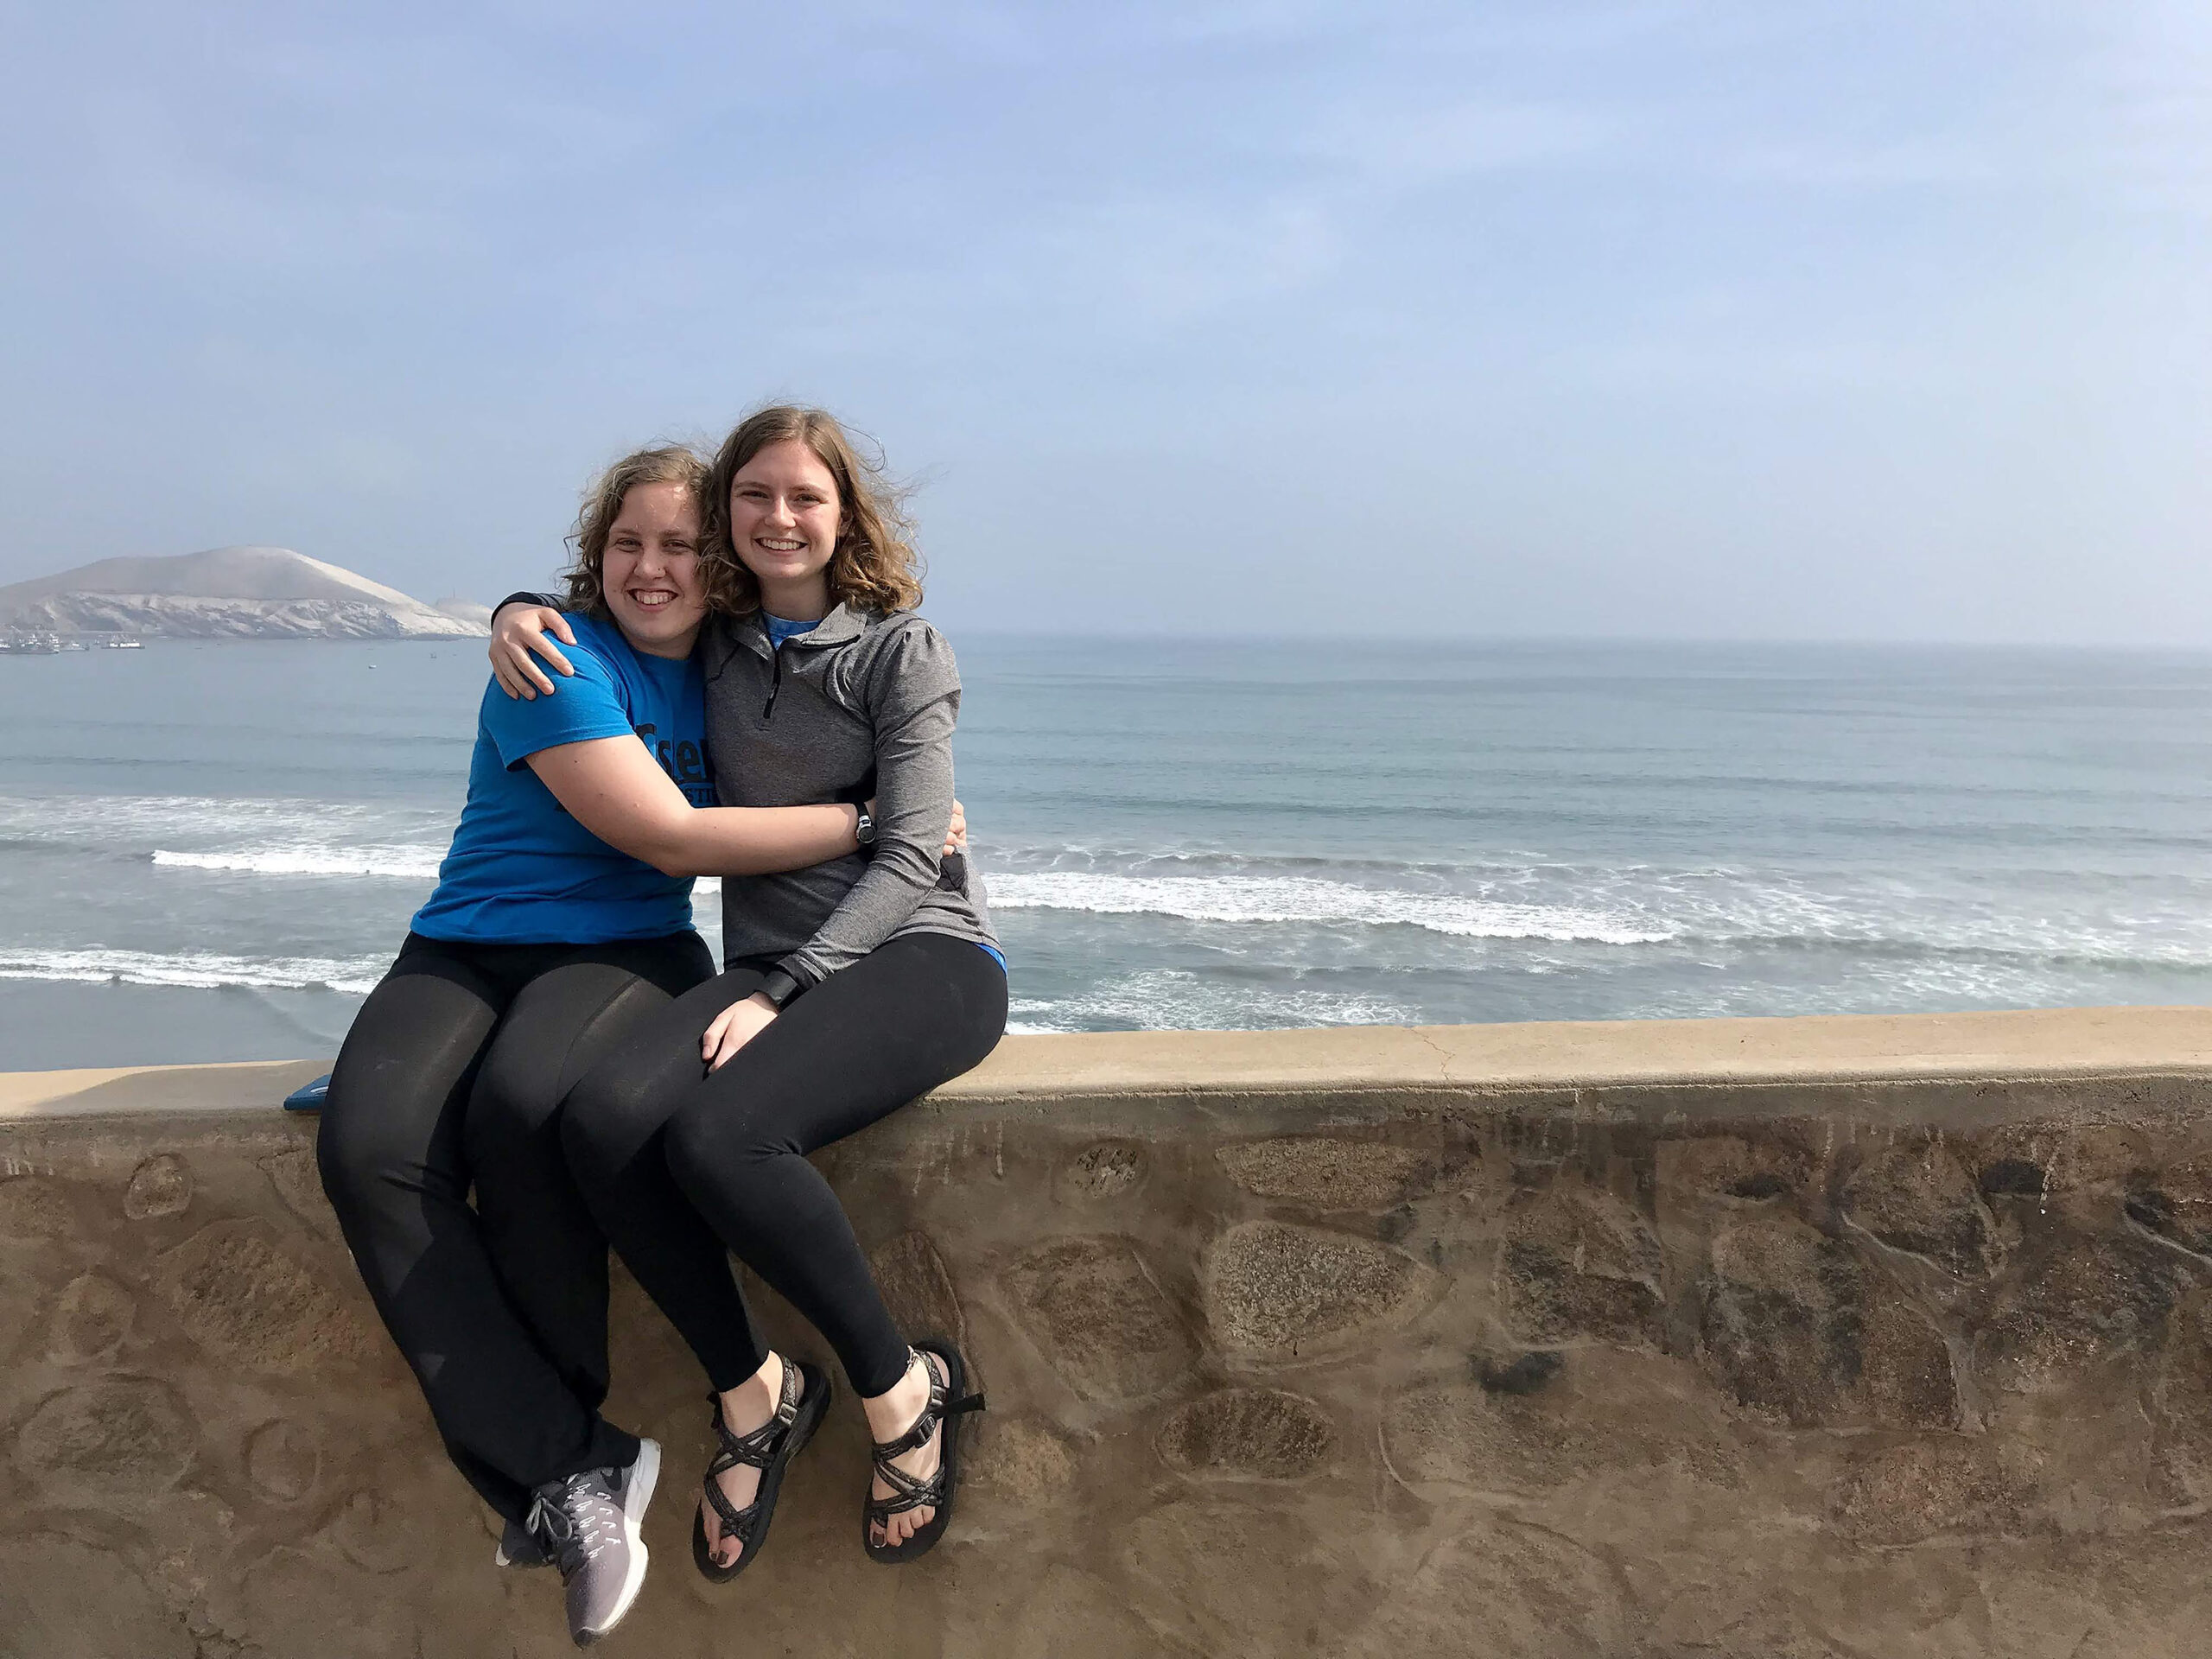 Renee and Anne Buckwalter take photo by the ocean